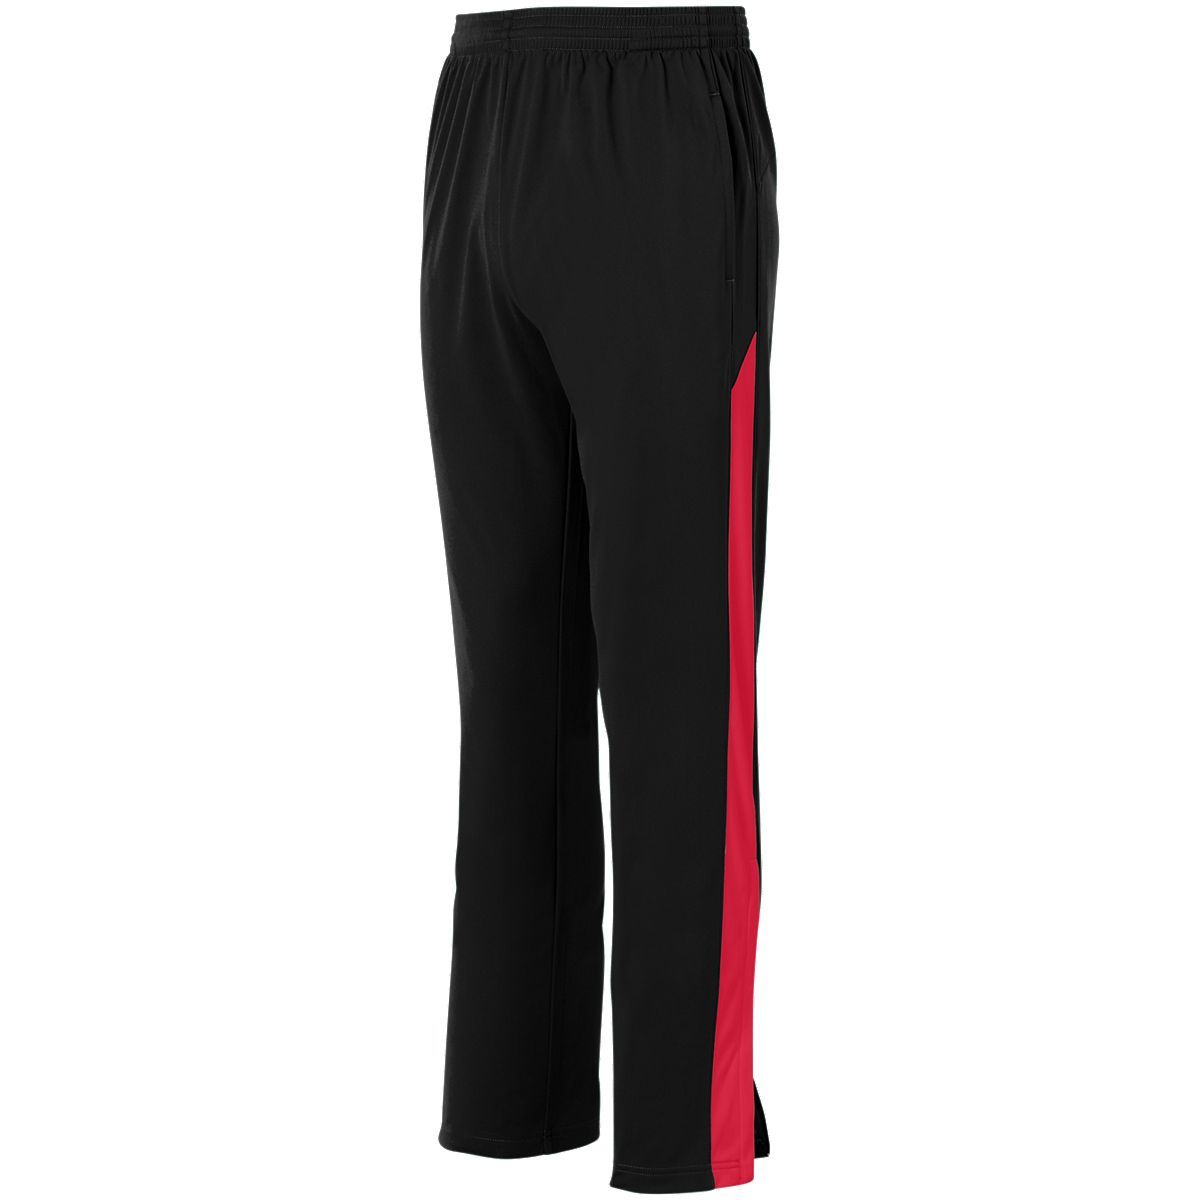 Augusta Sportswear Medalist Pant 2.0 in Black/Red  -Part of the Adult, Adult-Pants, Pants, Augusta-Products product lines at KanaleyCreations.com